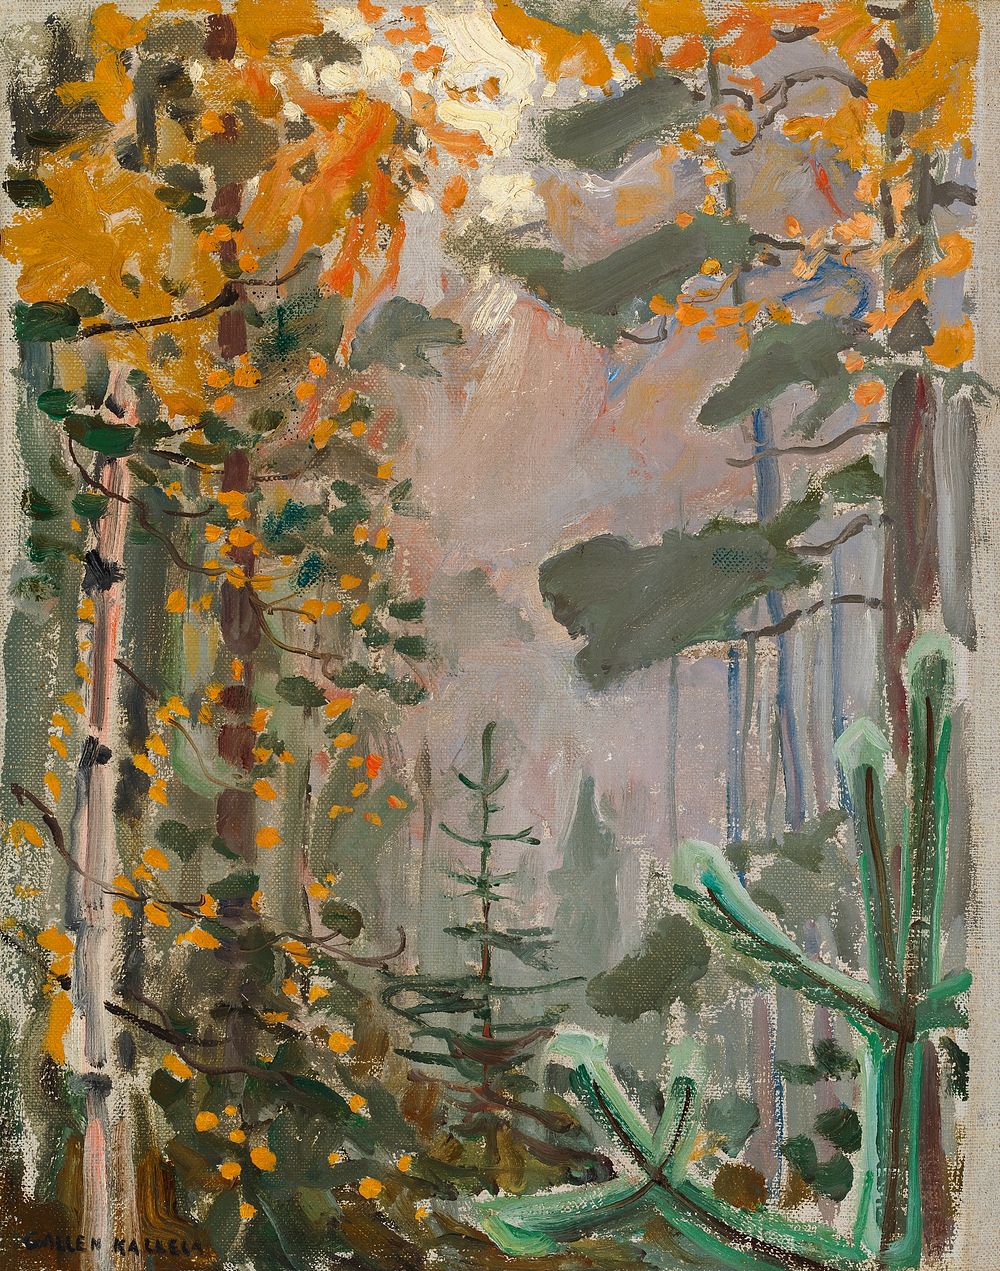 Autumn landscape, oil painting. Original public domain image by Akseli Gallen-Kallela from Finnish National Gallery.…